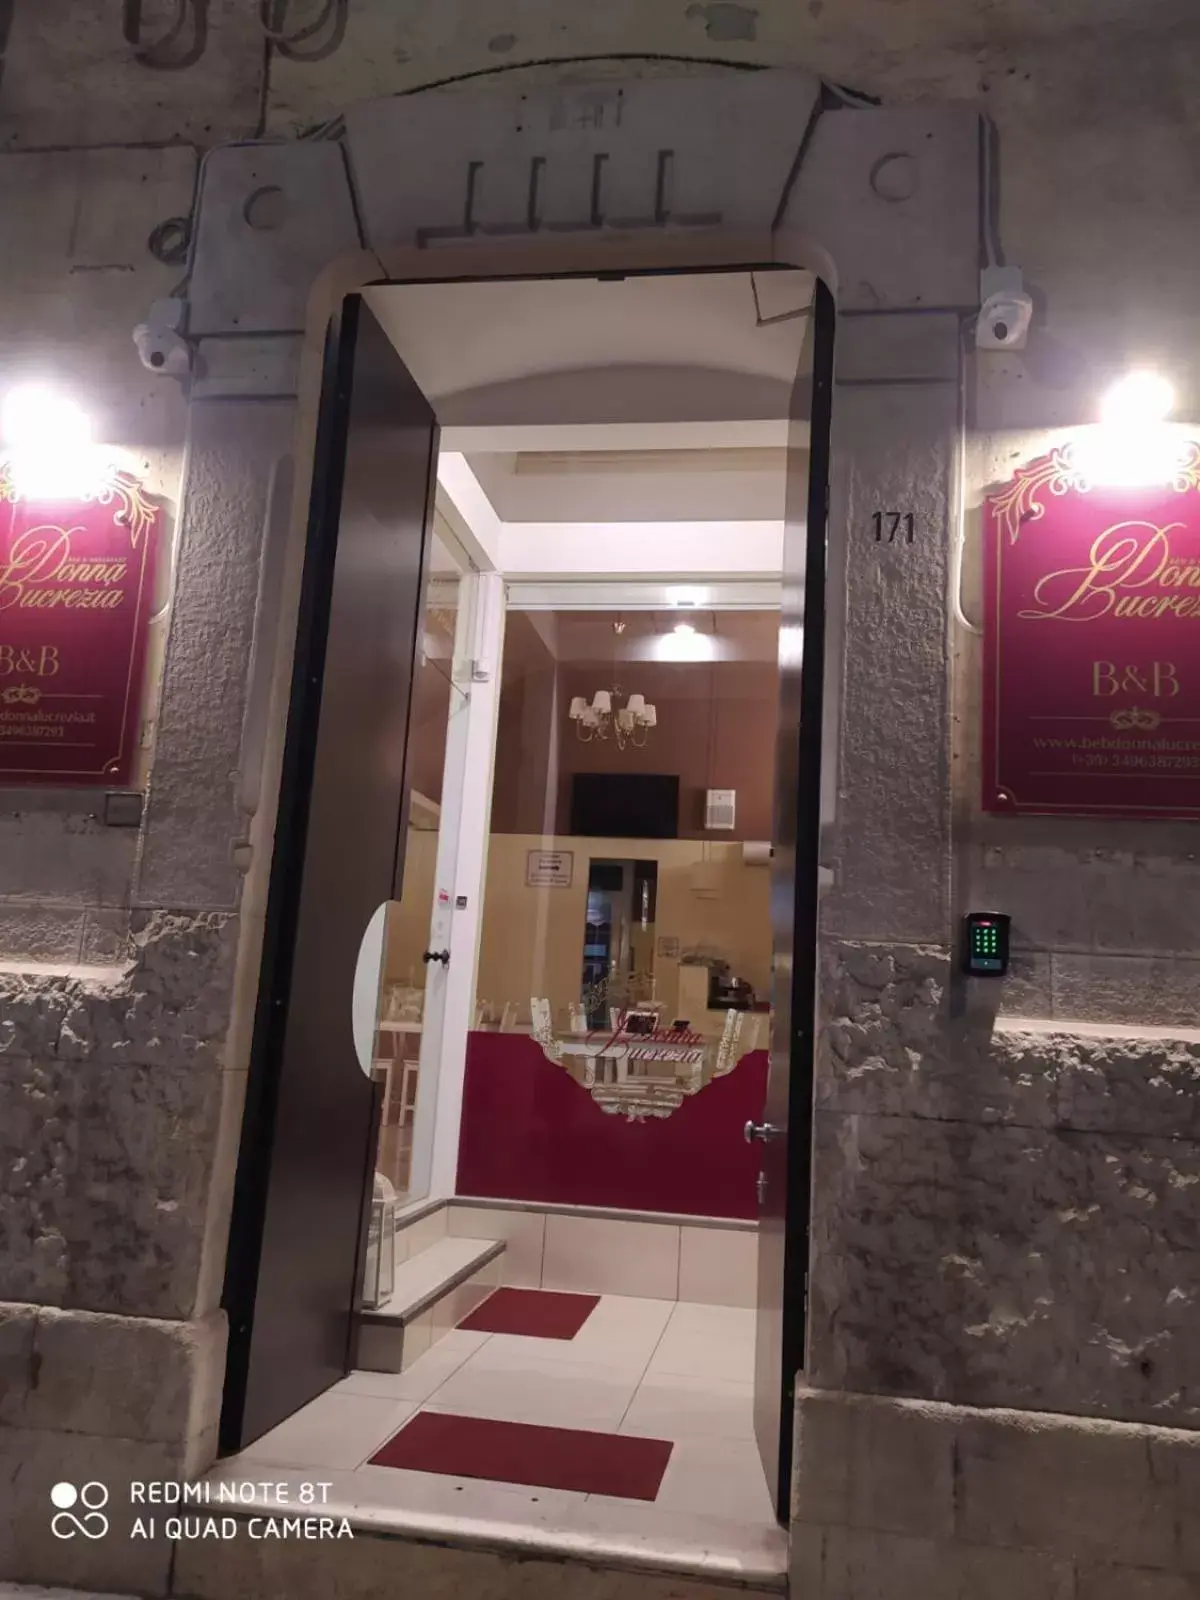 Property building in DONNA LUCREZIA b&b Boutique Hotel Style